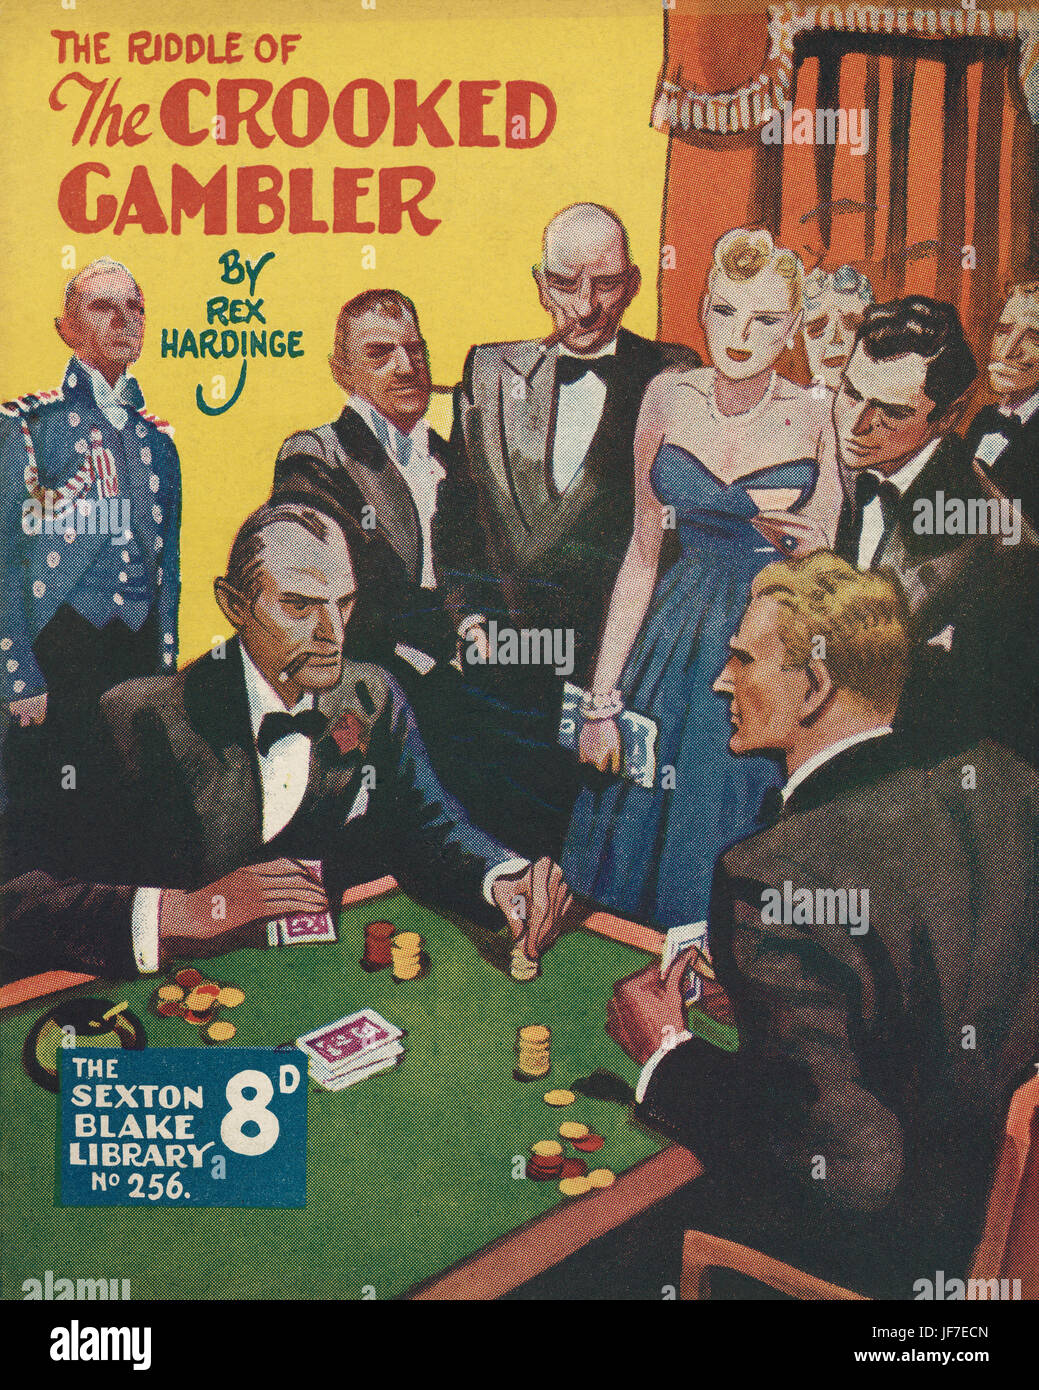 'The Riddle of the Crooked Gambler' by Rex Hardinge - book cover illustration. Gamblers sitting a green baize table.  From The Sexton Blake Library. 1952  Published by Amalgamated Press, London. Stock Photo